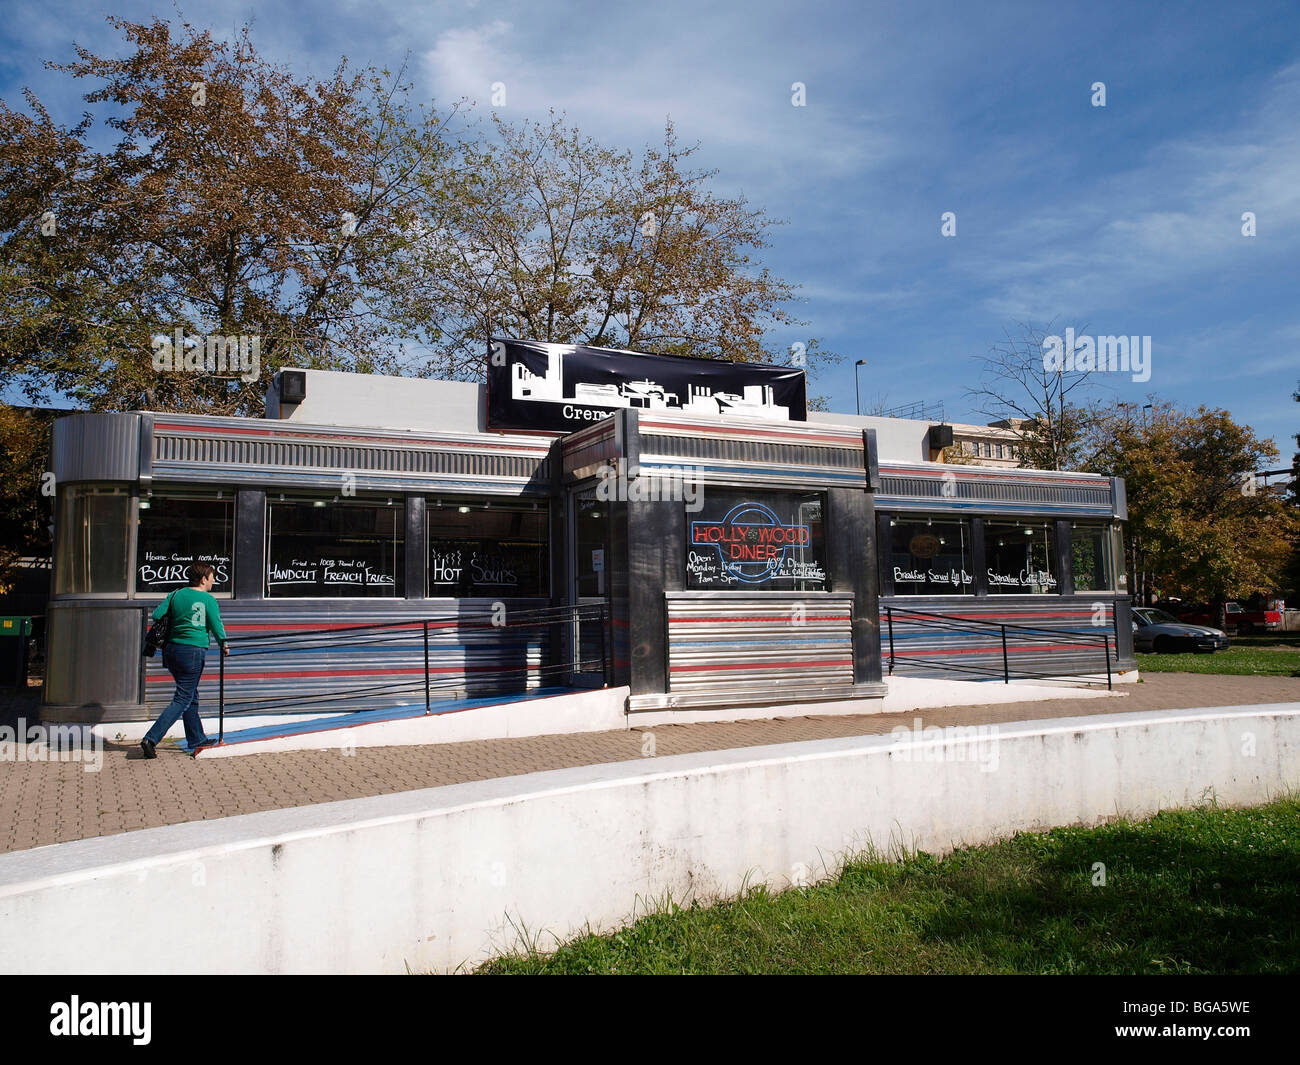 L'Hollywood Diner featured in film come Barry Levinson's 'Diner' e 'Liberty Heights" nonché "leepless in Seattle'. Foto Stock